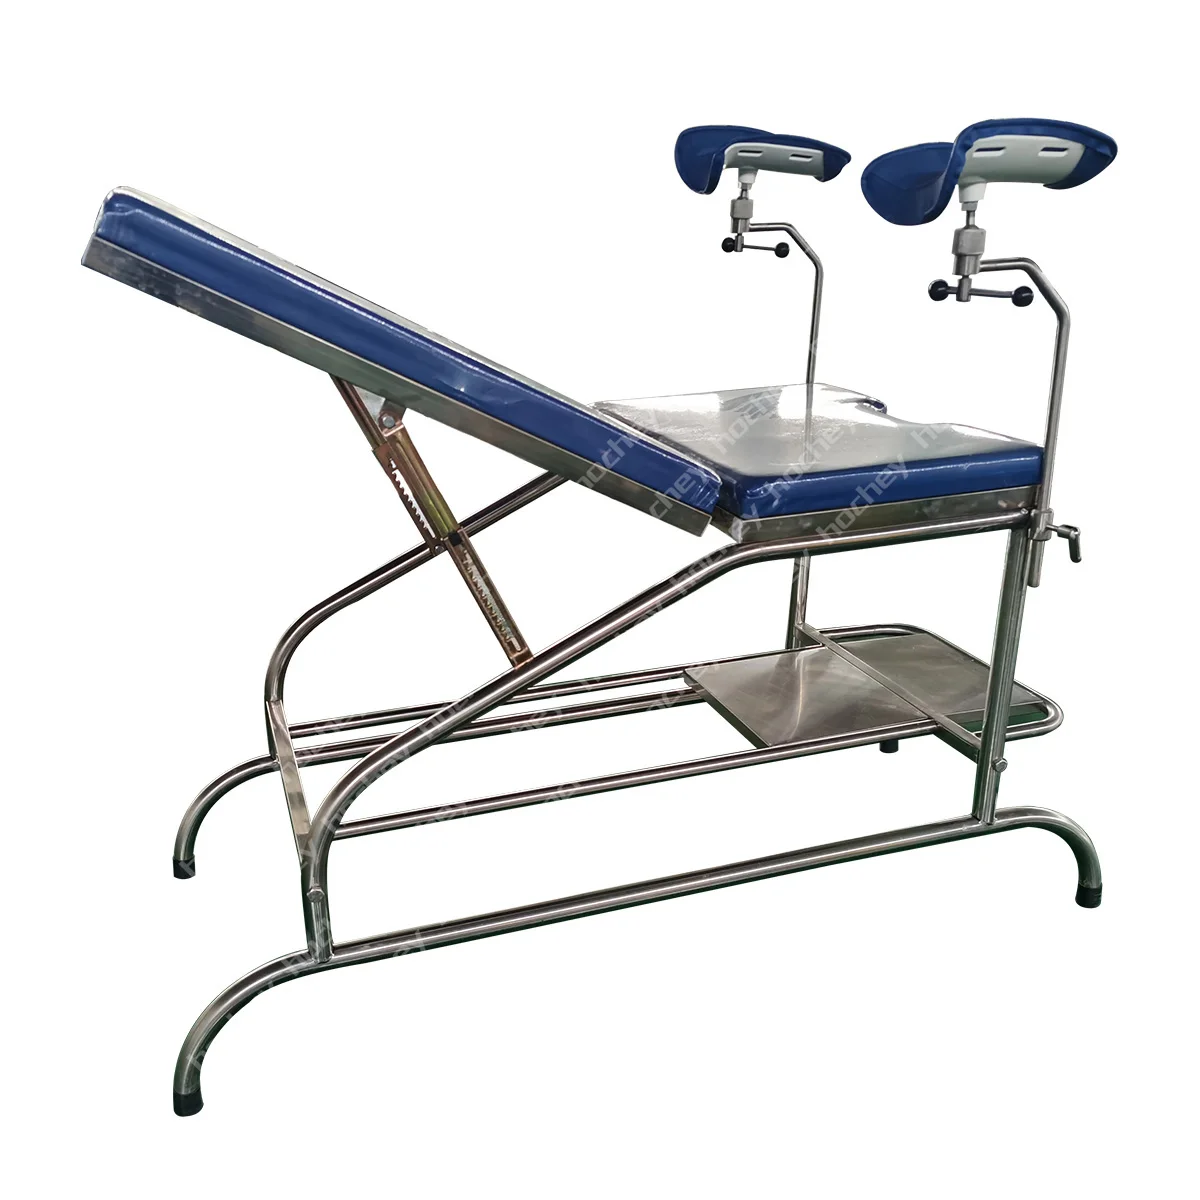 Hospital Equipment Stainless Steel Portable Gynecological Examing Table